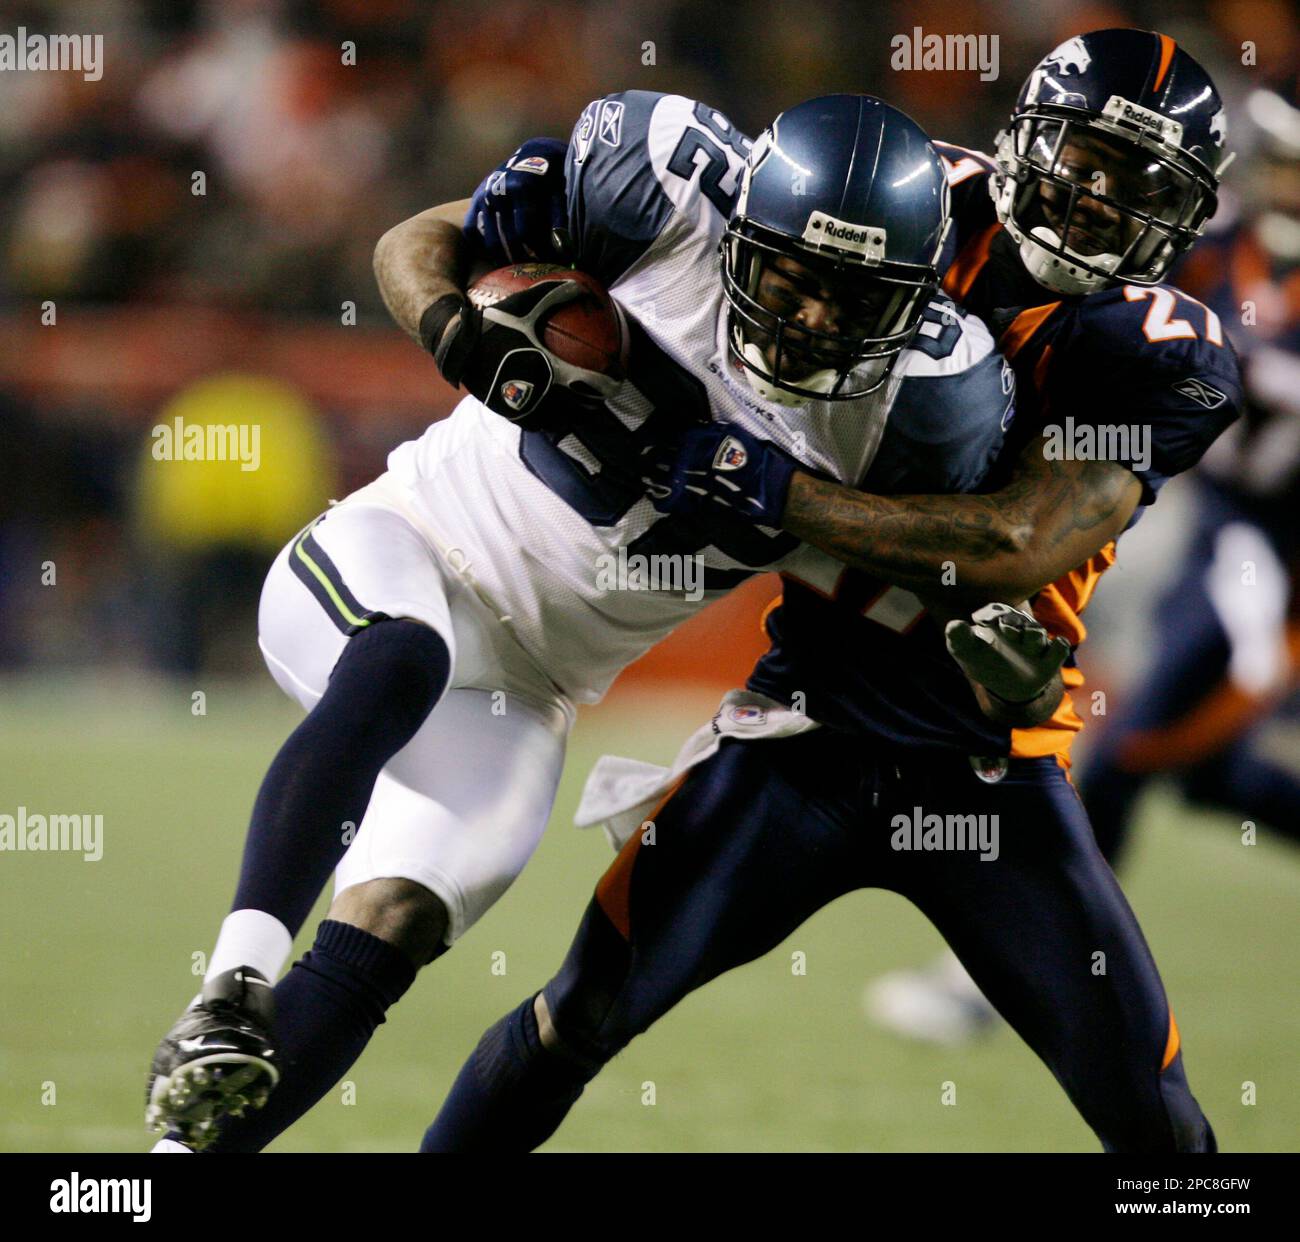 Seattle Seahawks wide receiver Darrell Jackson, left, is dragged down after  pulling in a pass for a short gain by Denver Broncos cornerback Darrent  Williams in the first quarter of an NFL